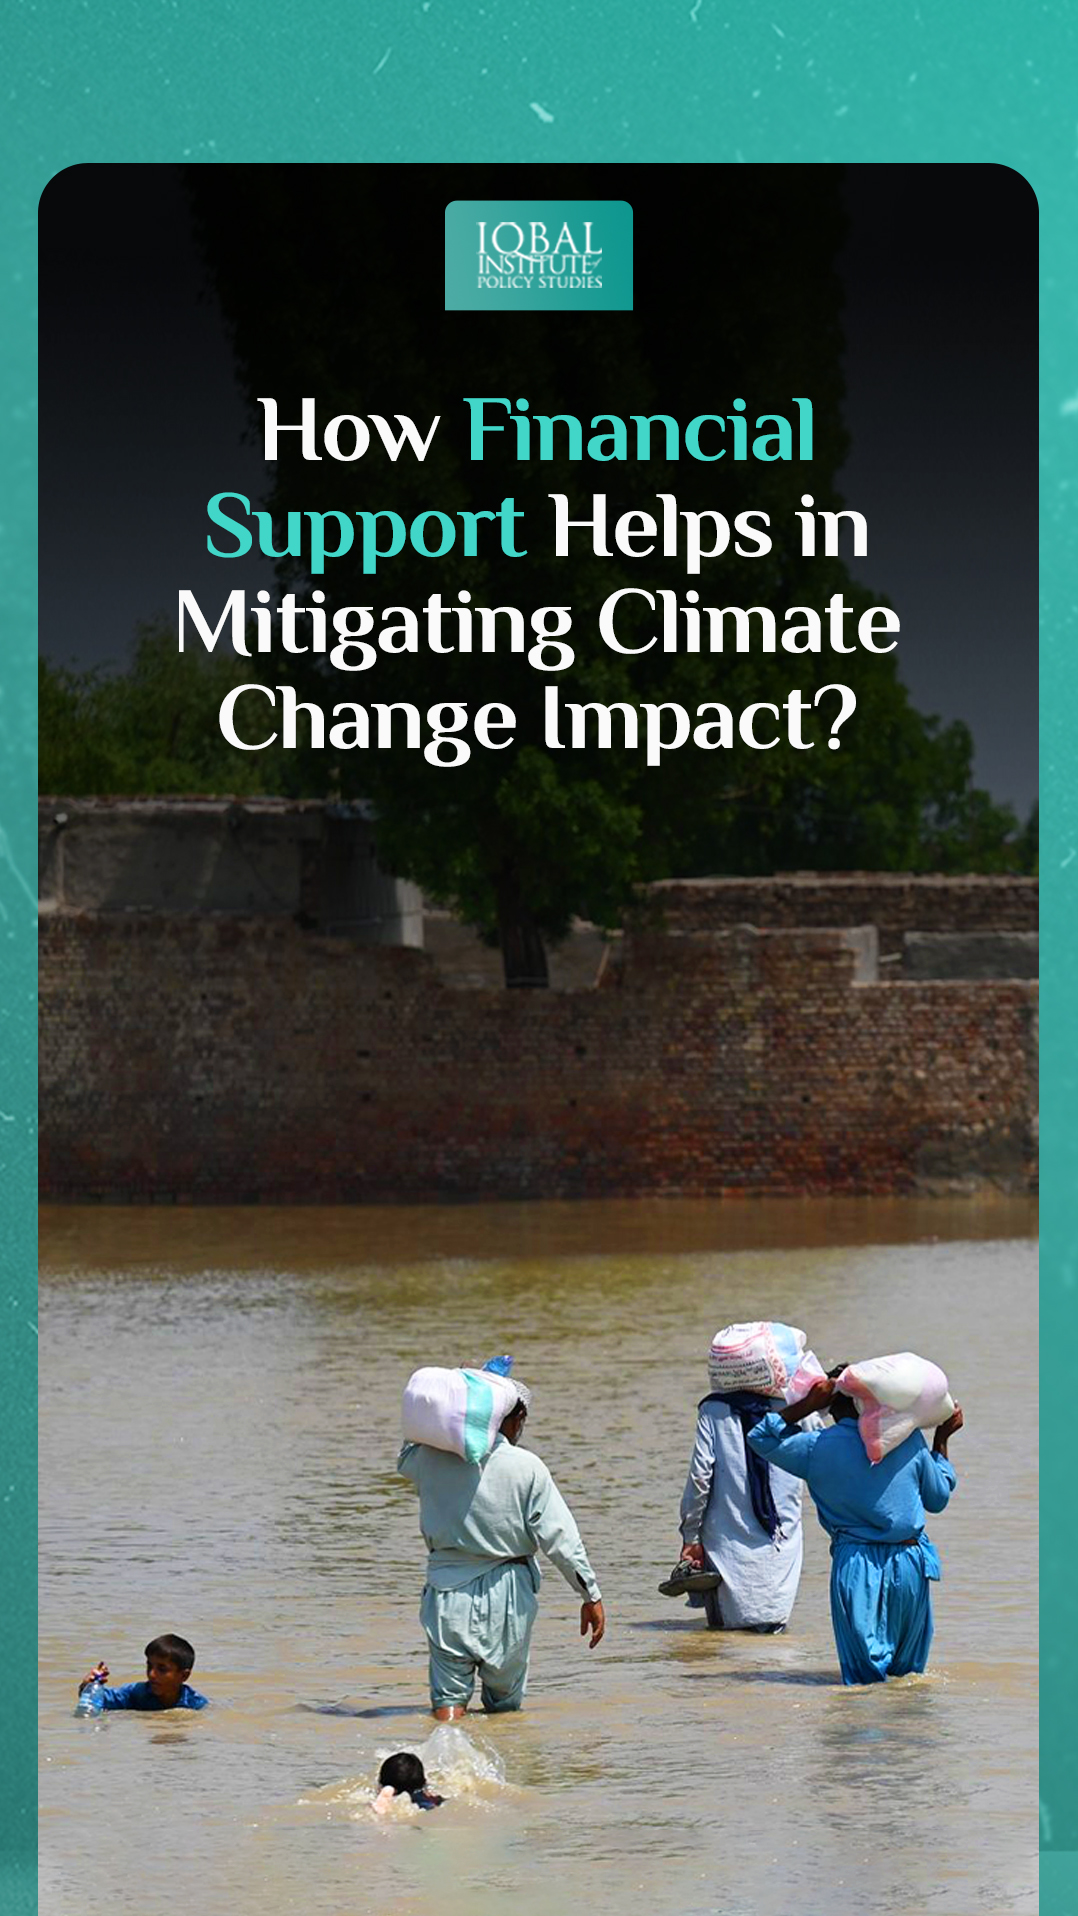 How Financial support helps in mitigating climate change impact?